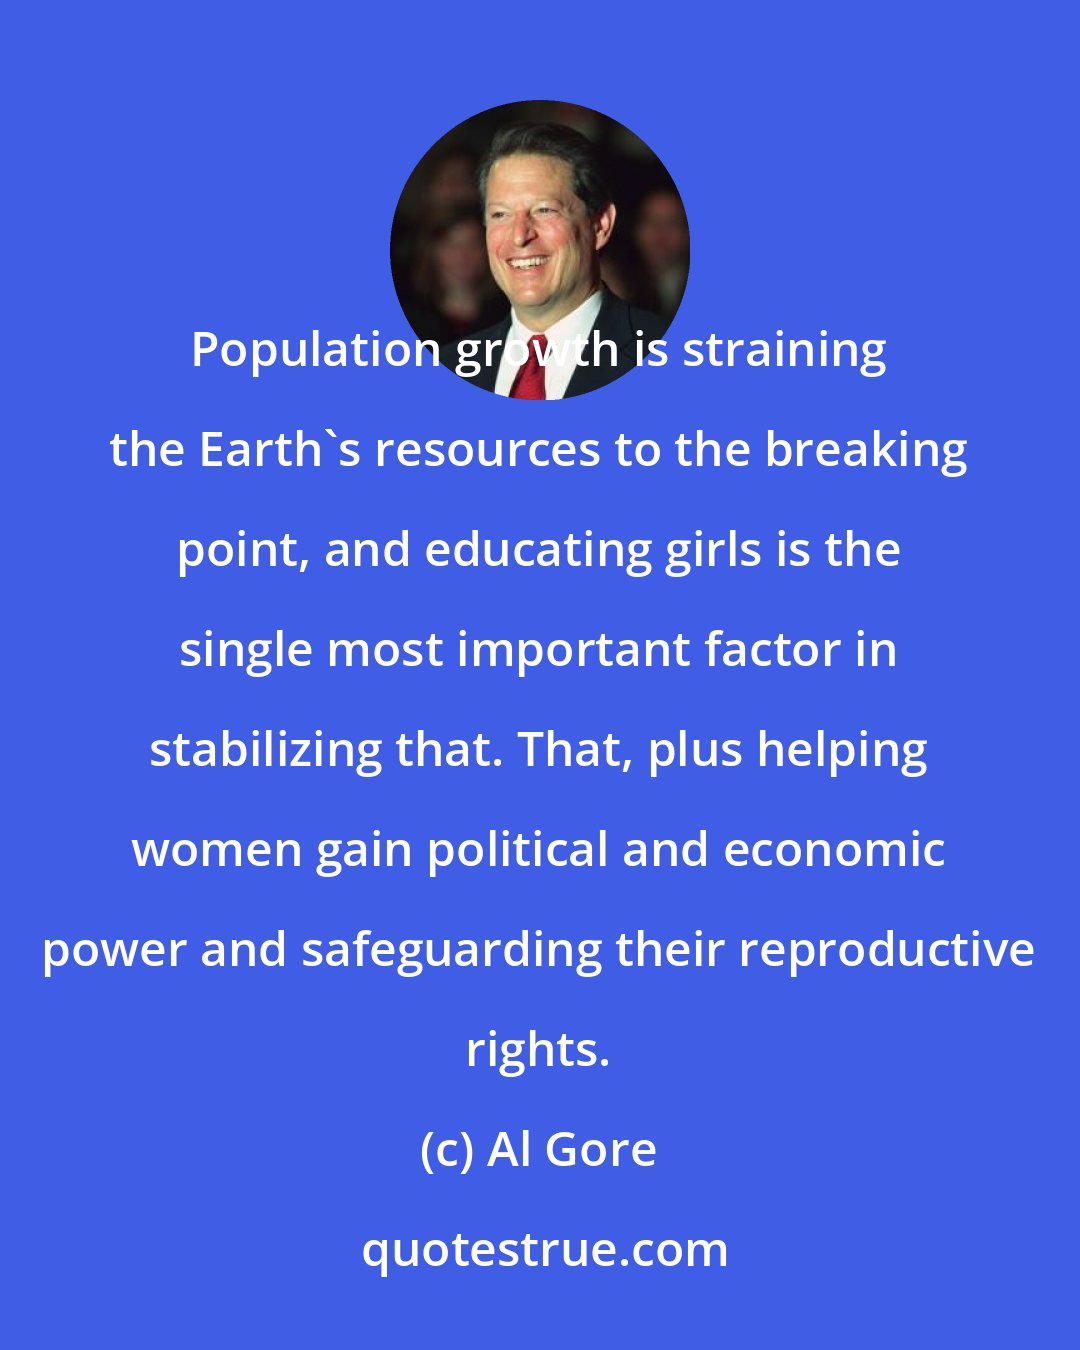 Al Gore: Population growth is straining the Earth's resources to the breaking point, and educating girls is the single most important factor in stabilizing that. That, plus helping women gain political and economic power and safeguarding their reproductive rights.